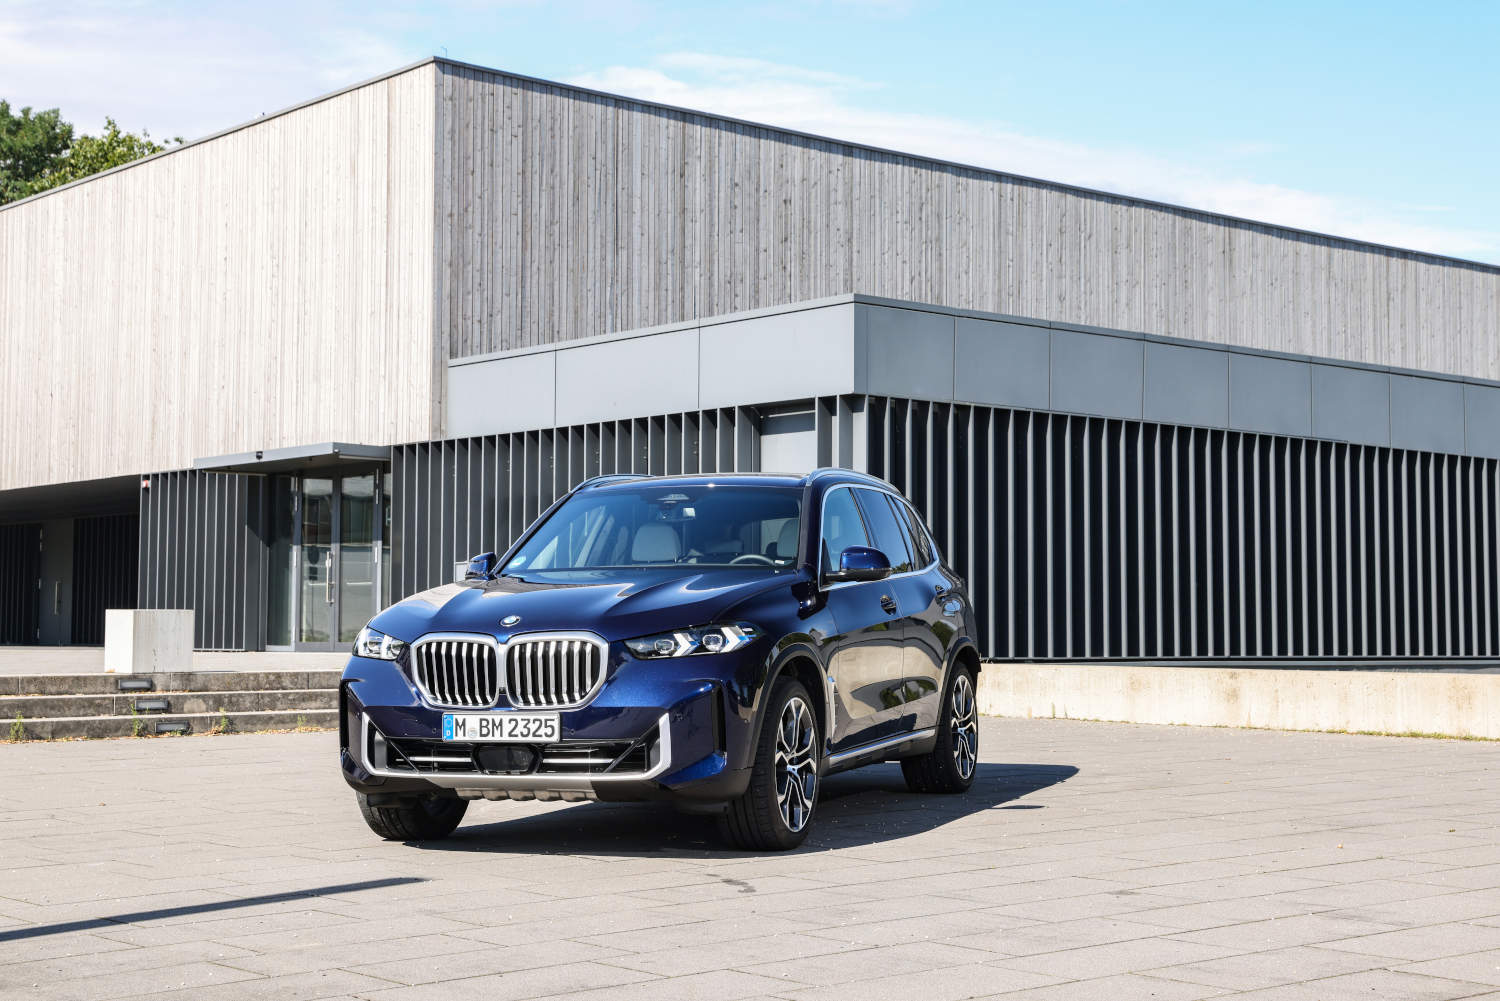 Depreciation struck this BMW X5 more than other SUVs